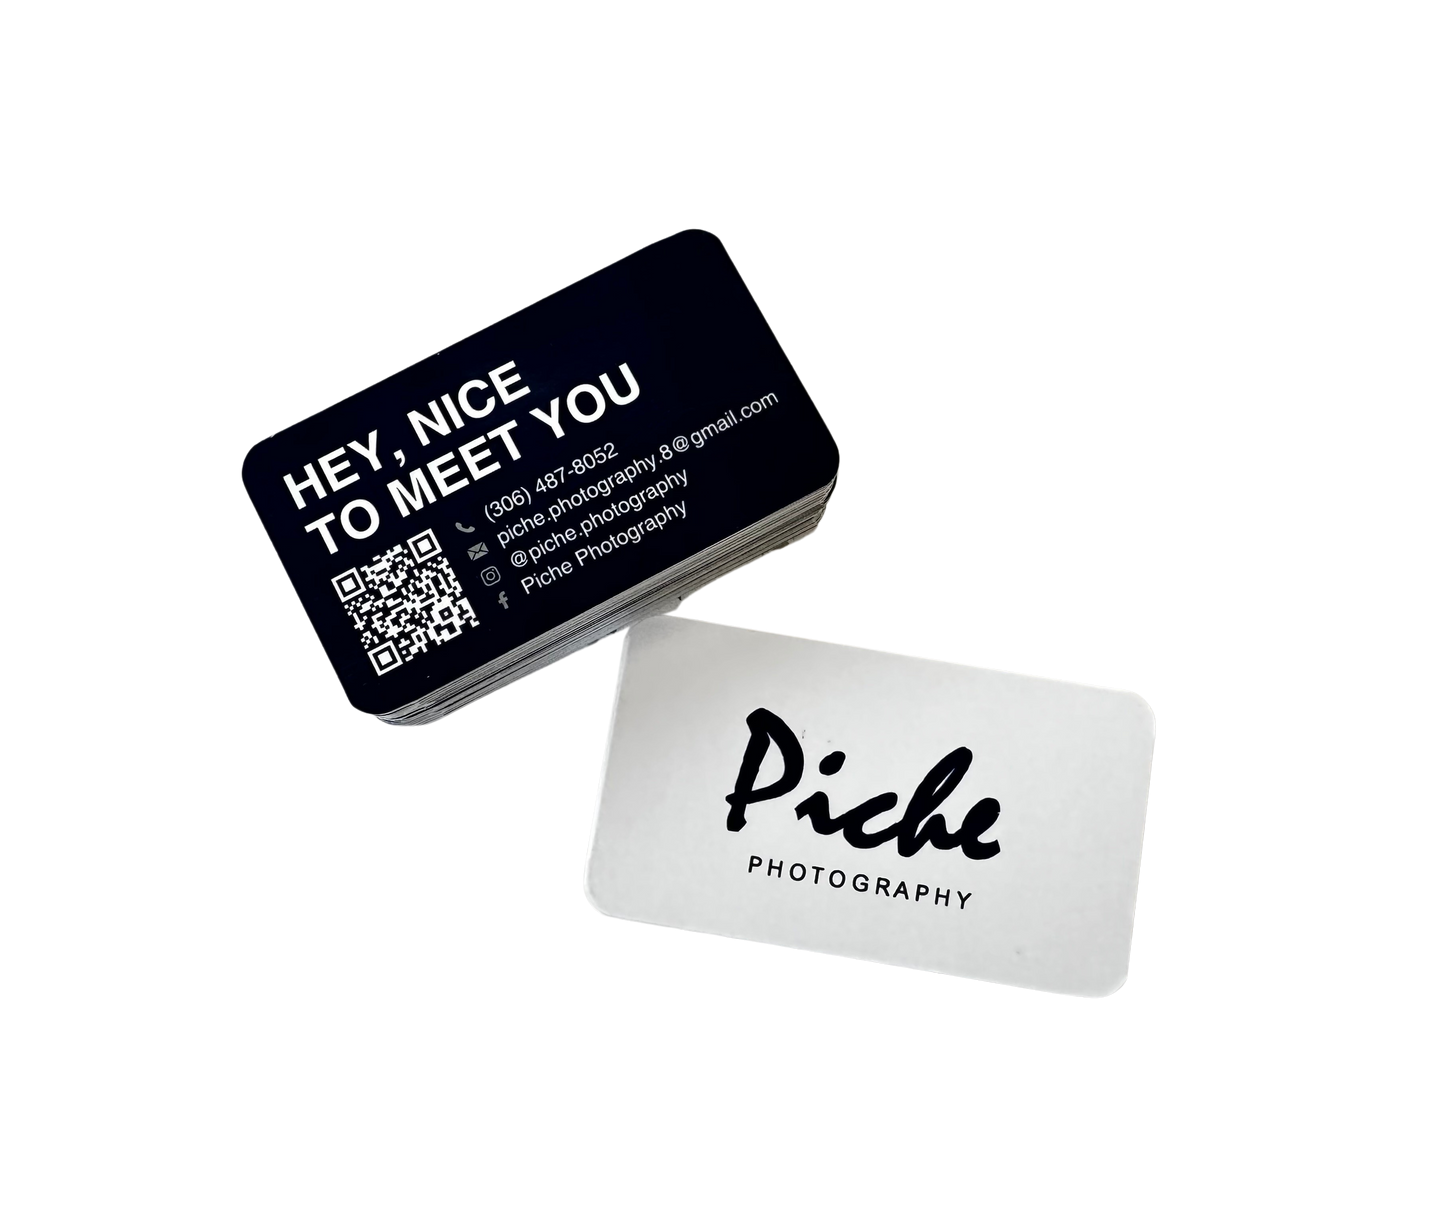 18pt soft touch business cards